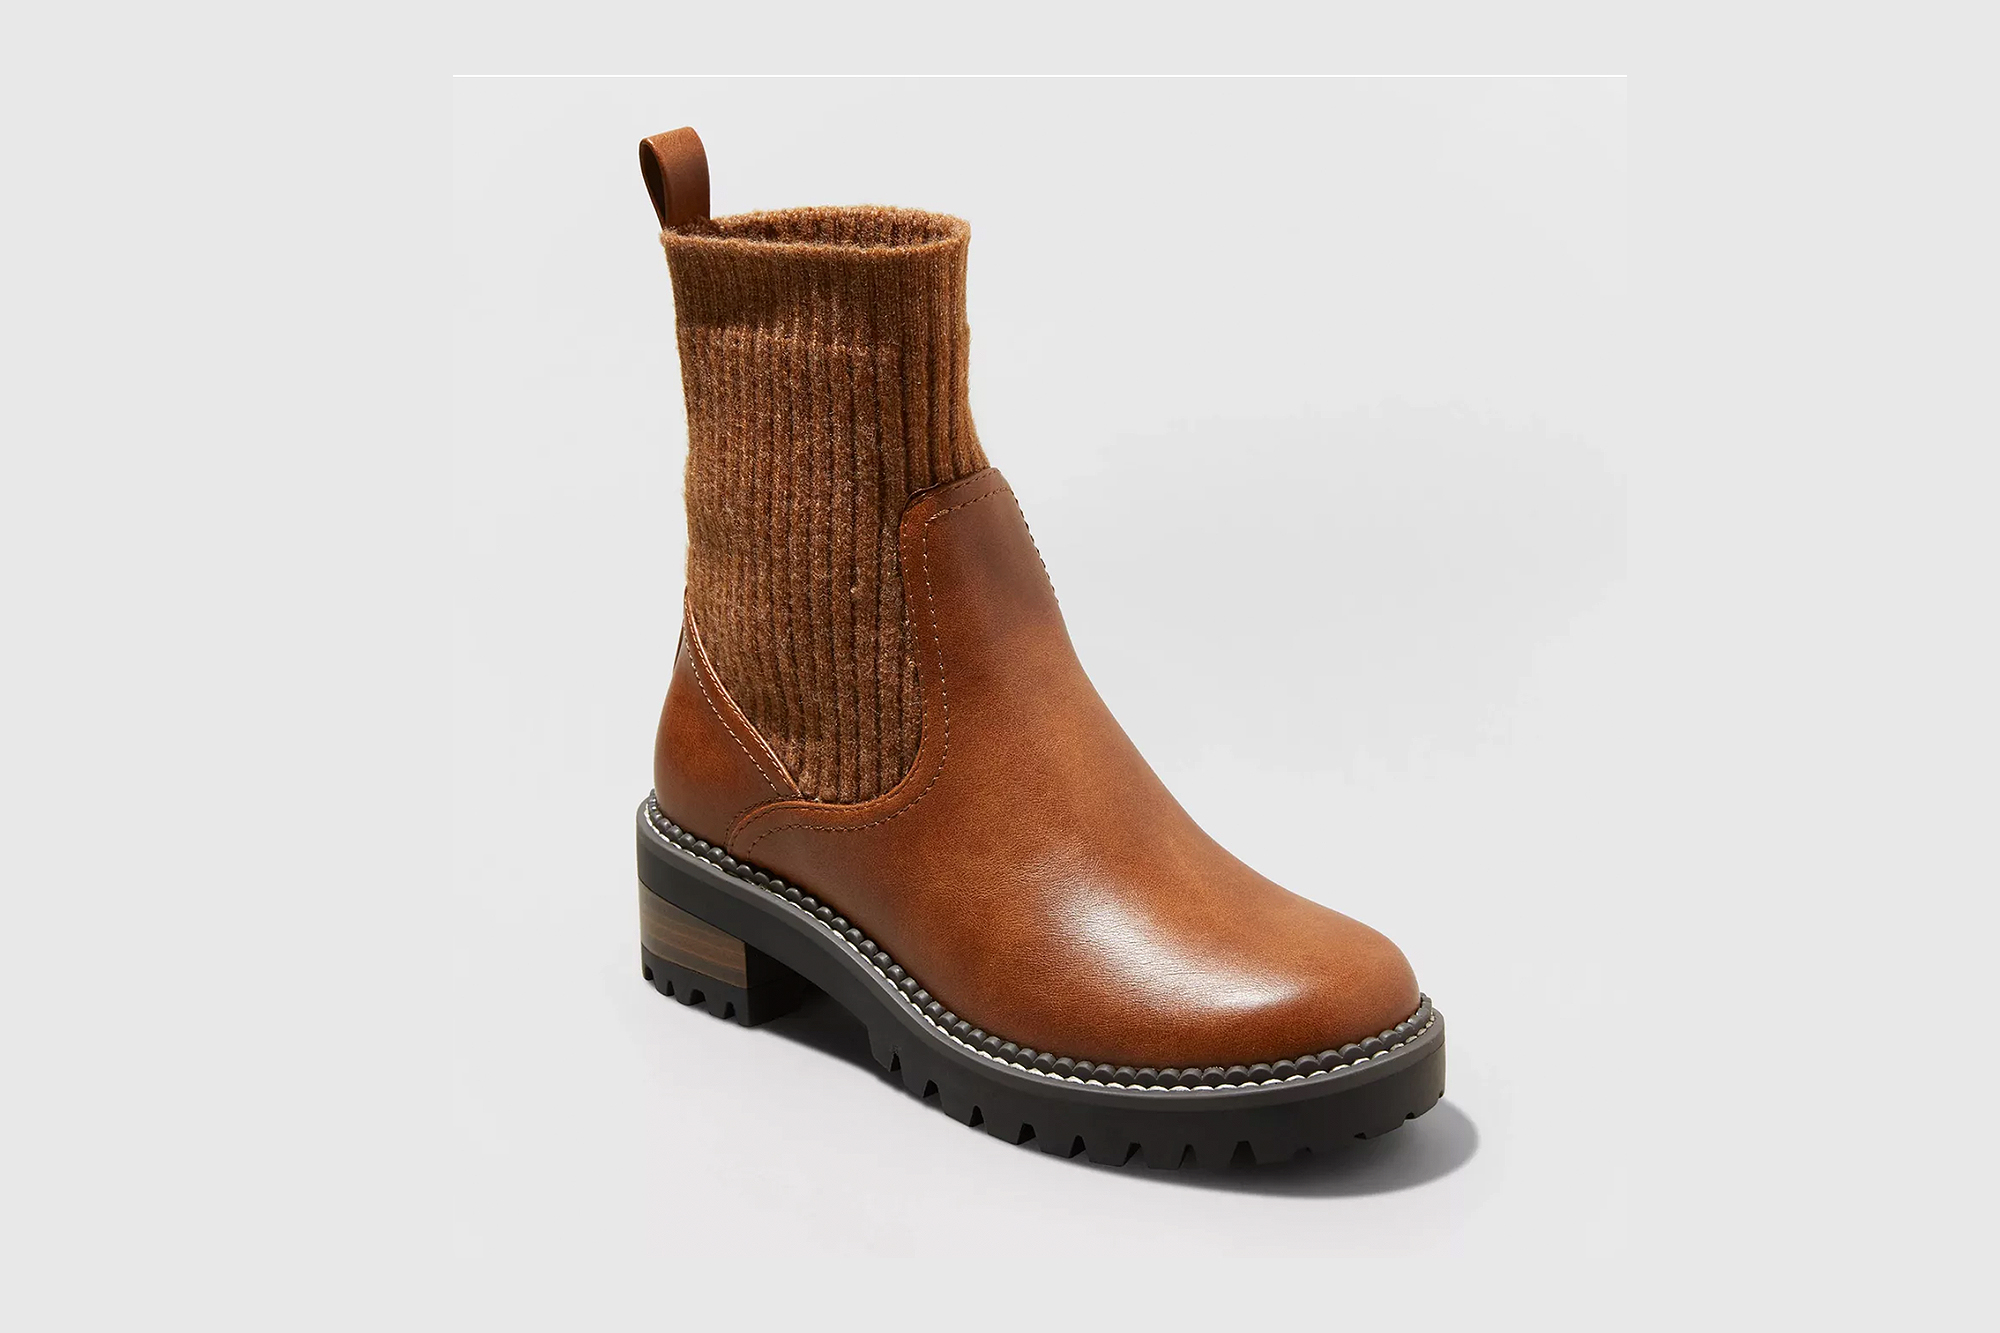 Sock boots are trending heavily for fall and with good reason